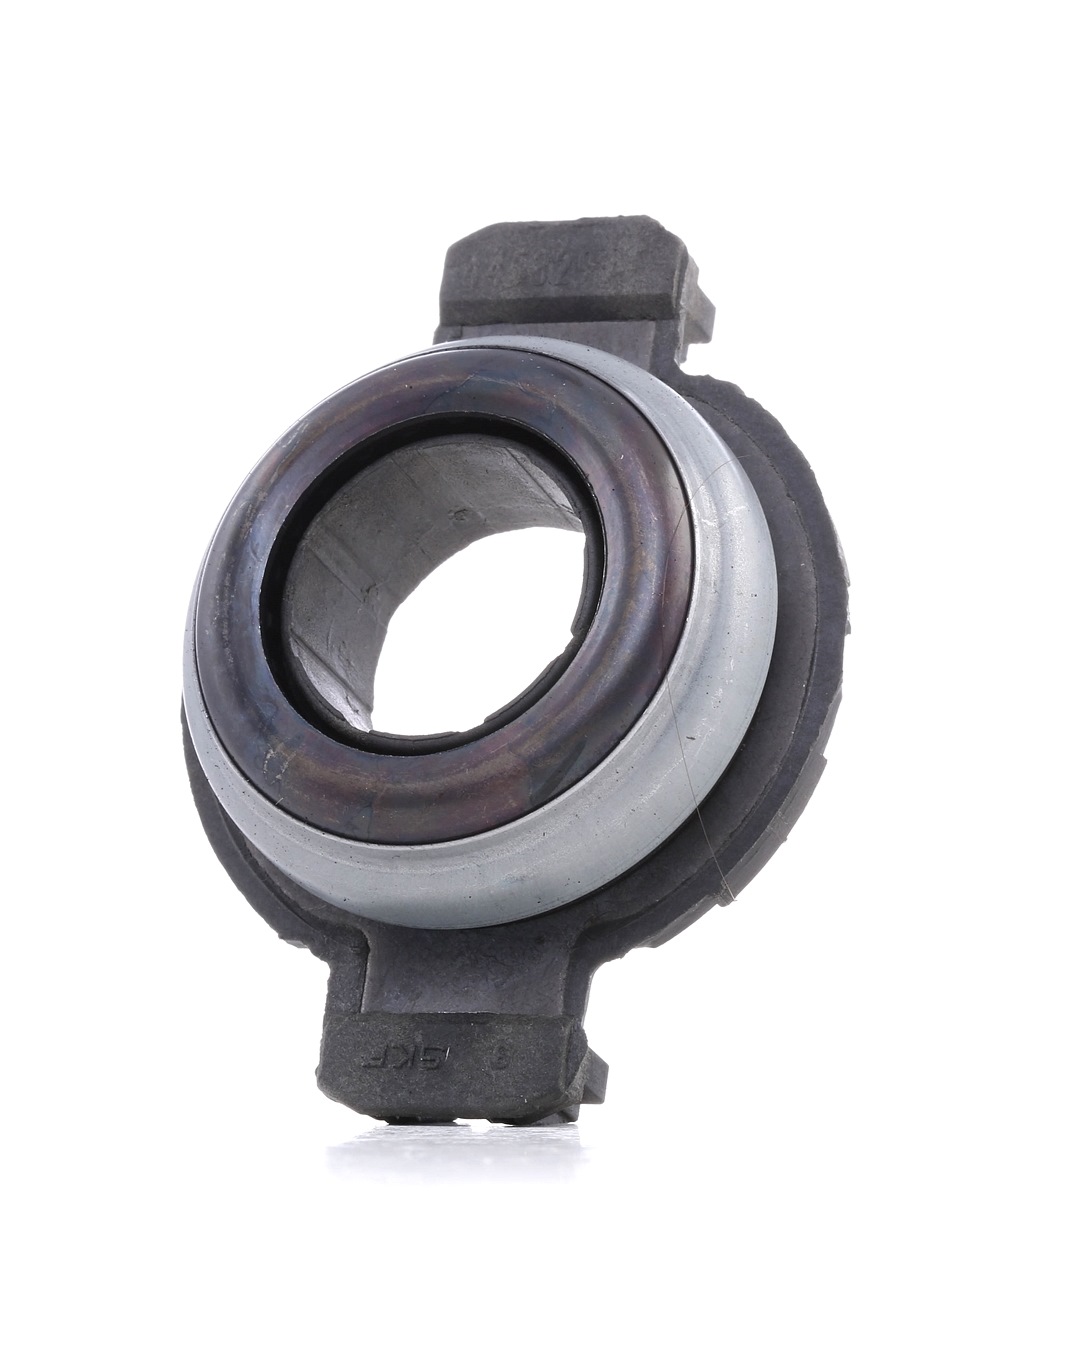 Image of SACHS Clutch Release Bearing FIAT,PEUGEOT,CITROËN 3151 276 501 204150,204164,C0000204160 Clutch Bearing,Release Bearing,Releaser 9614677380,9635856280